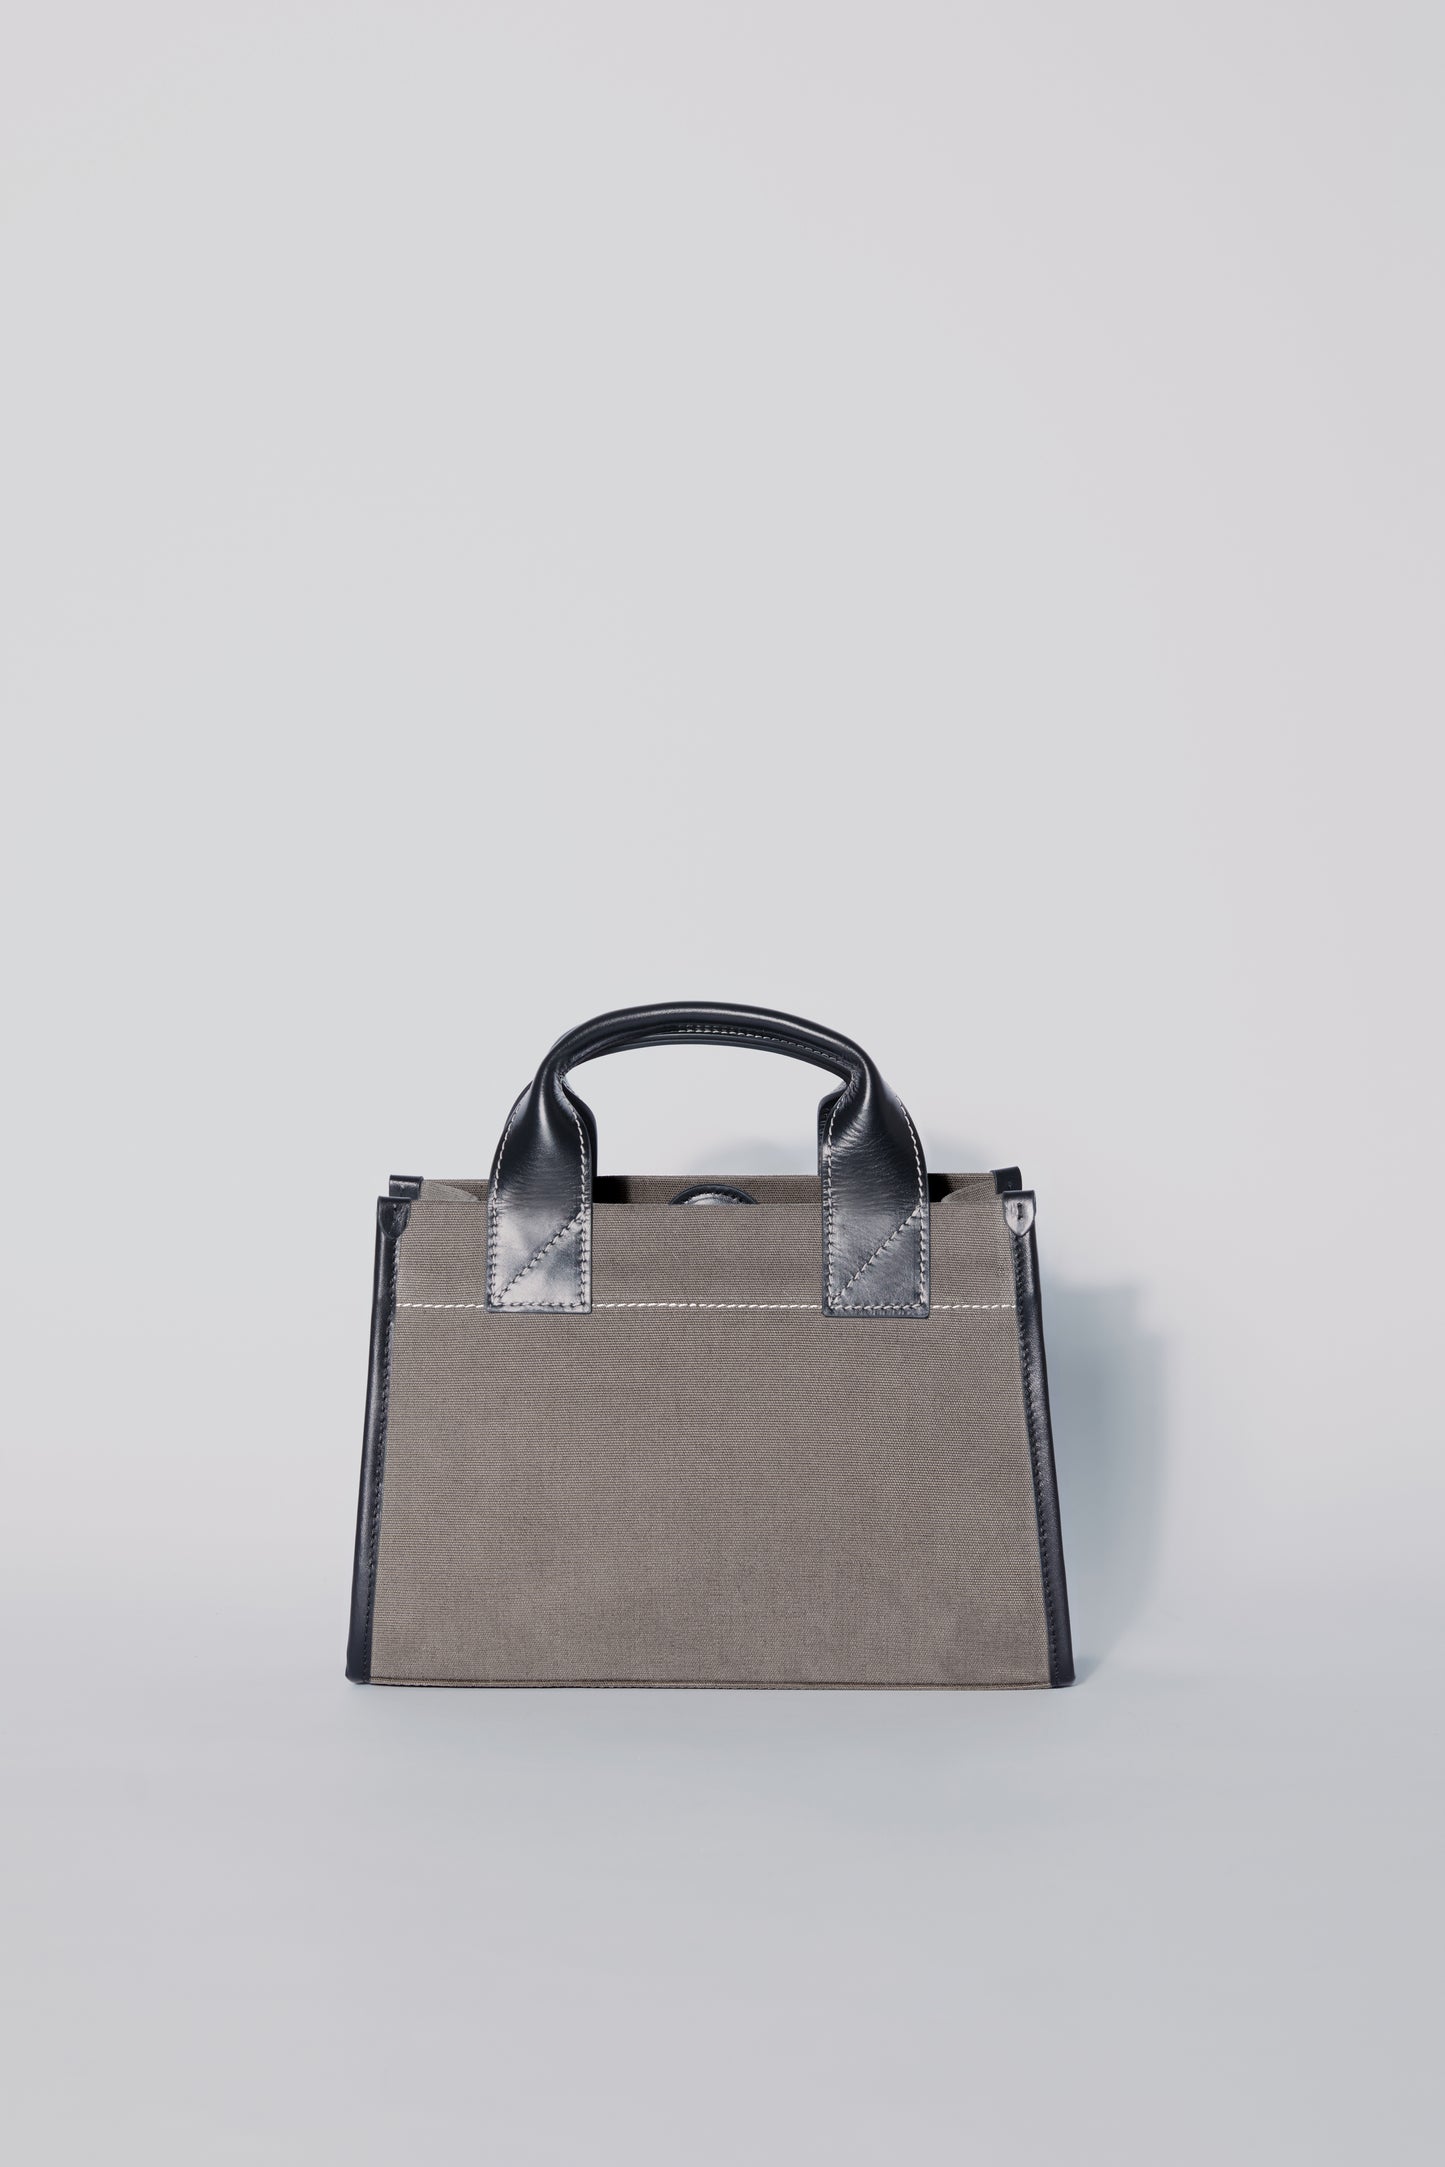 STITCHED POCKET MINI TOTE BAG IN MINK AND BLACK